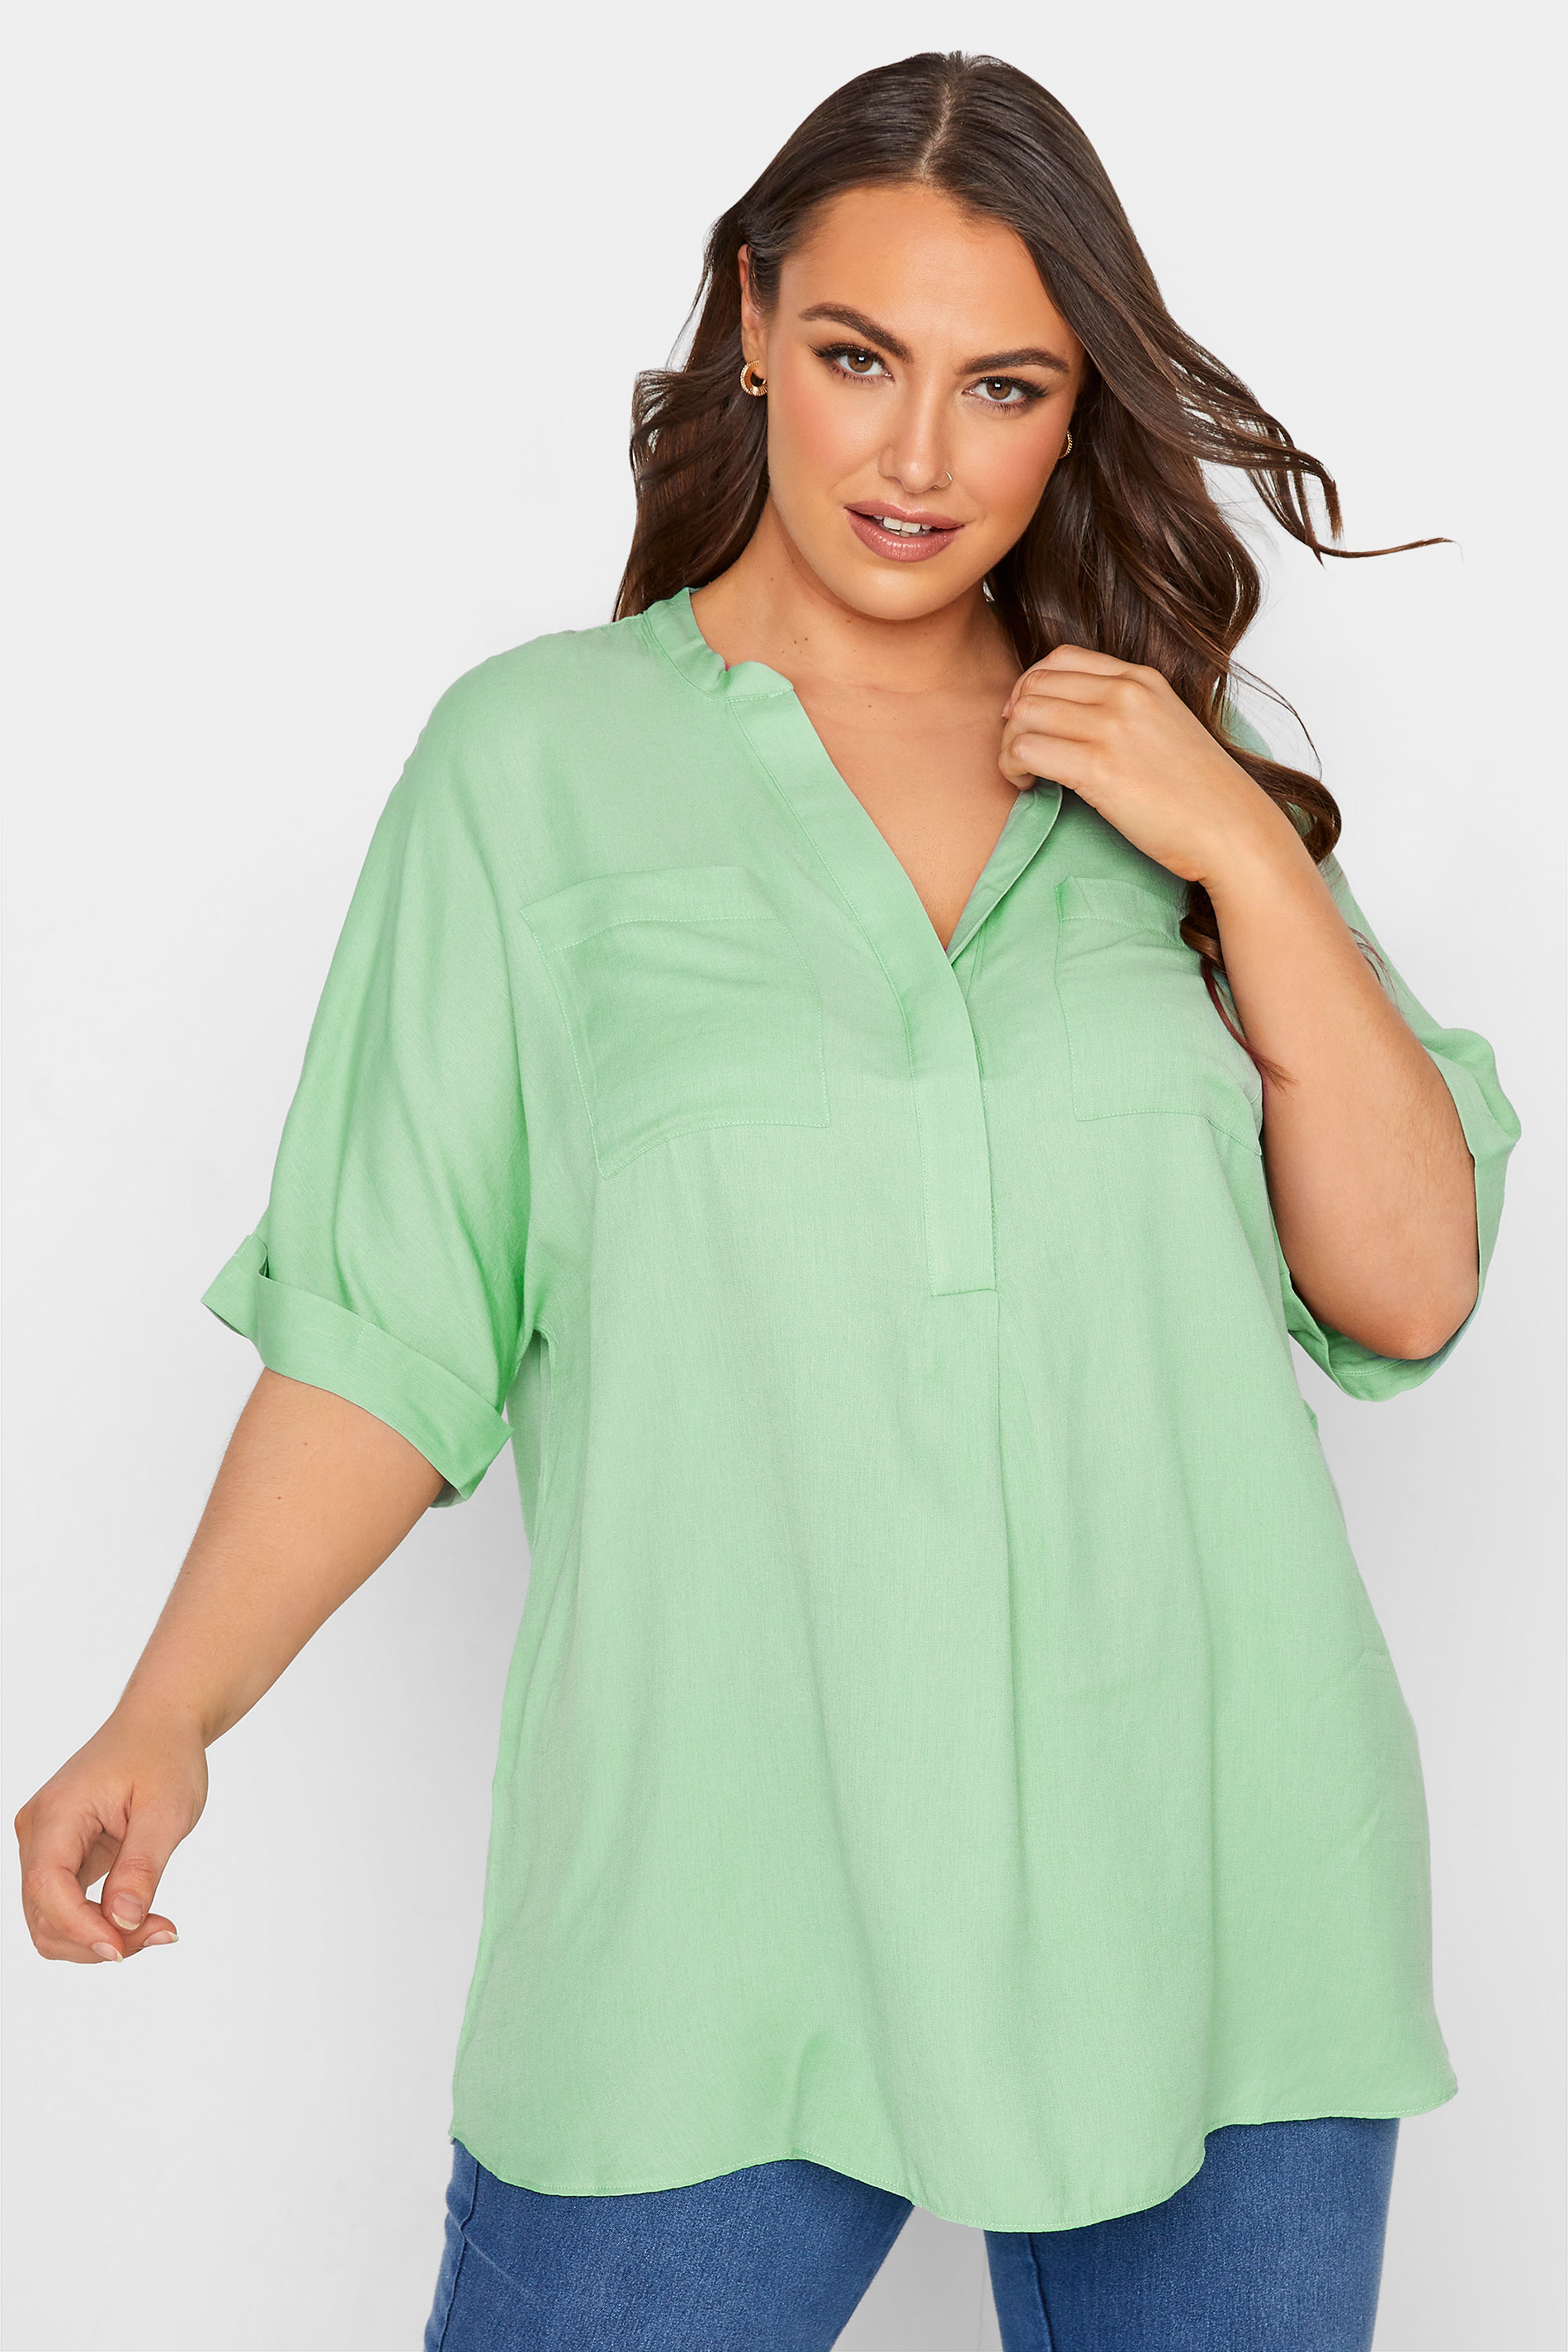 Mint Green Pocket Shirt | Yours Clothing